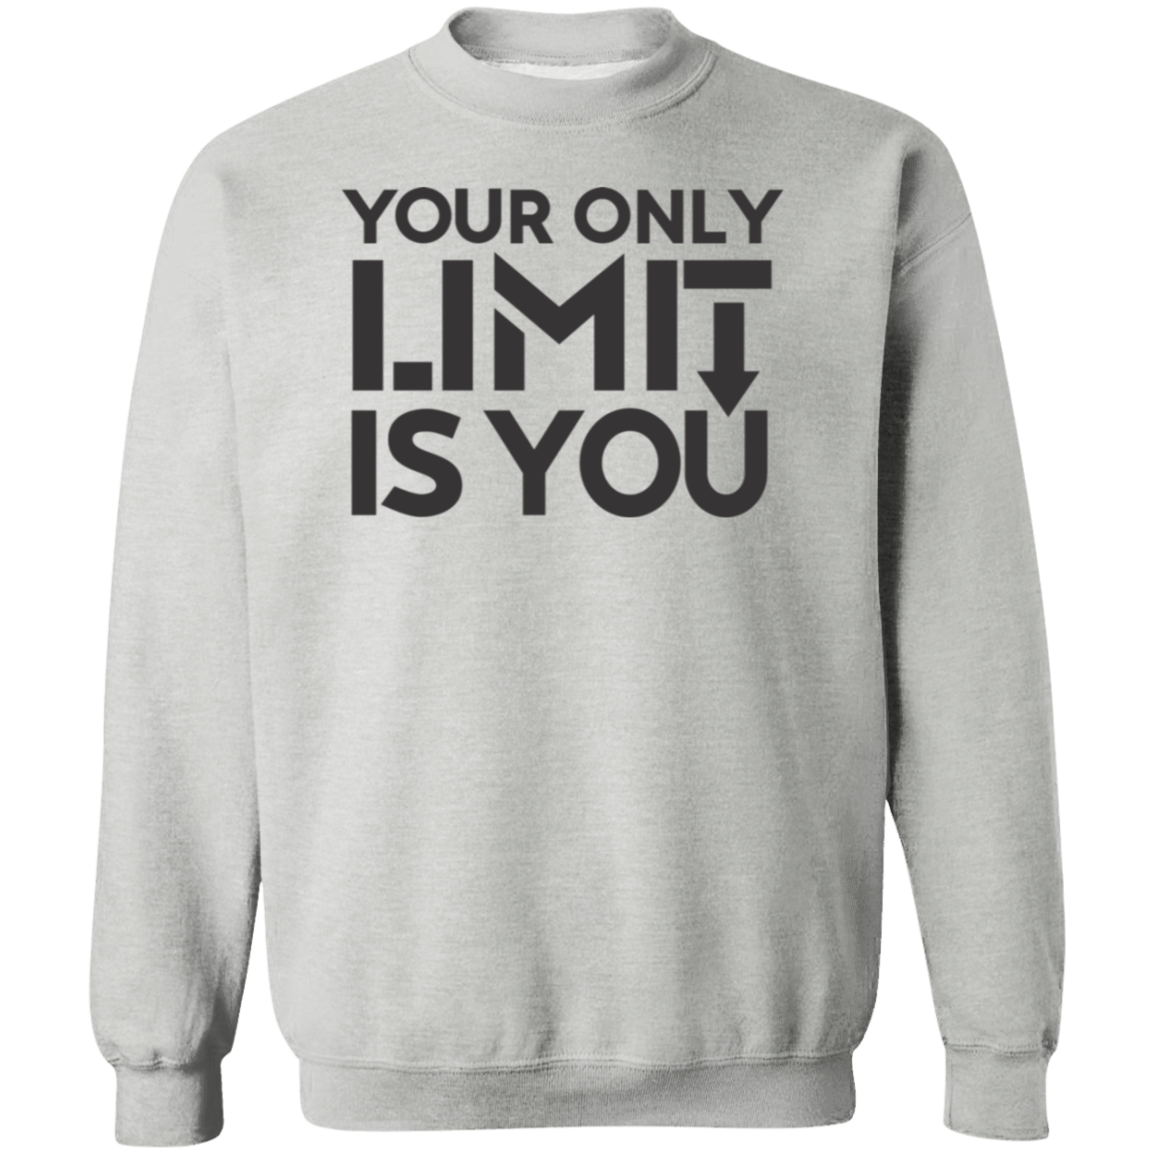 Your Only Limit is You Premium Crew Neck Sweatshirt - Game Day Getup